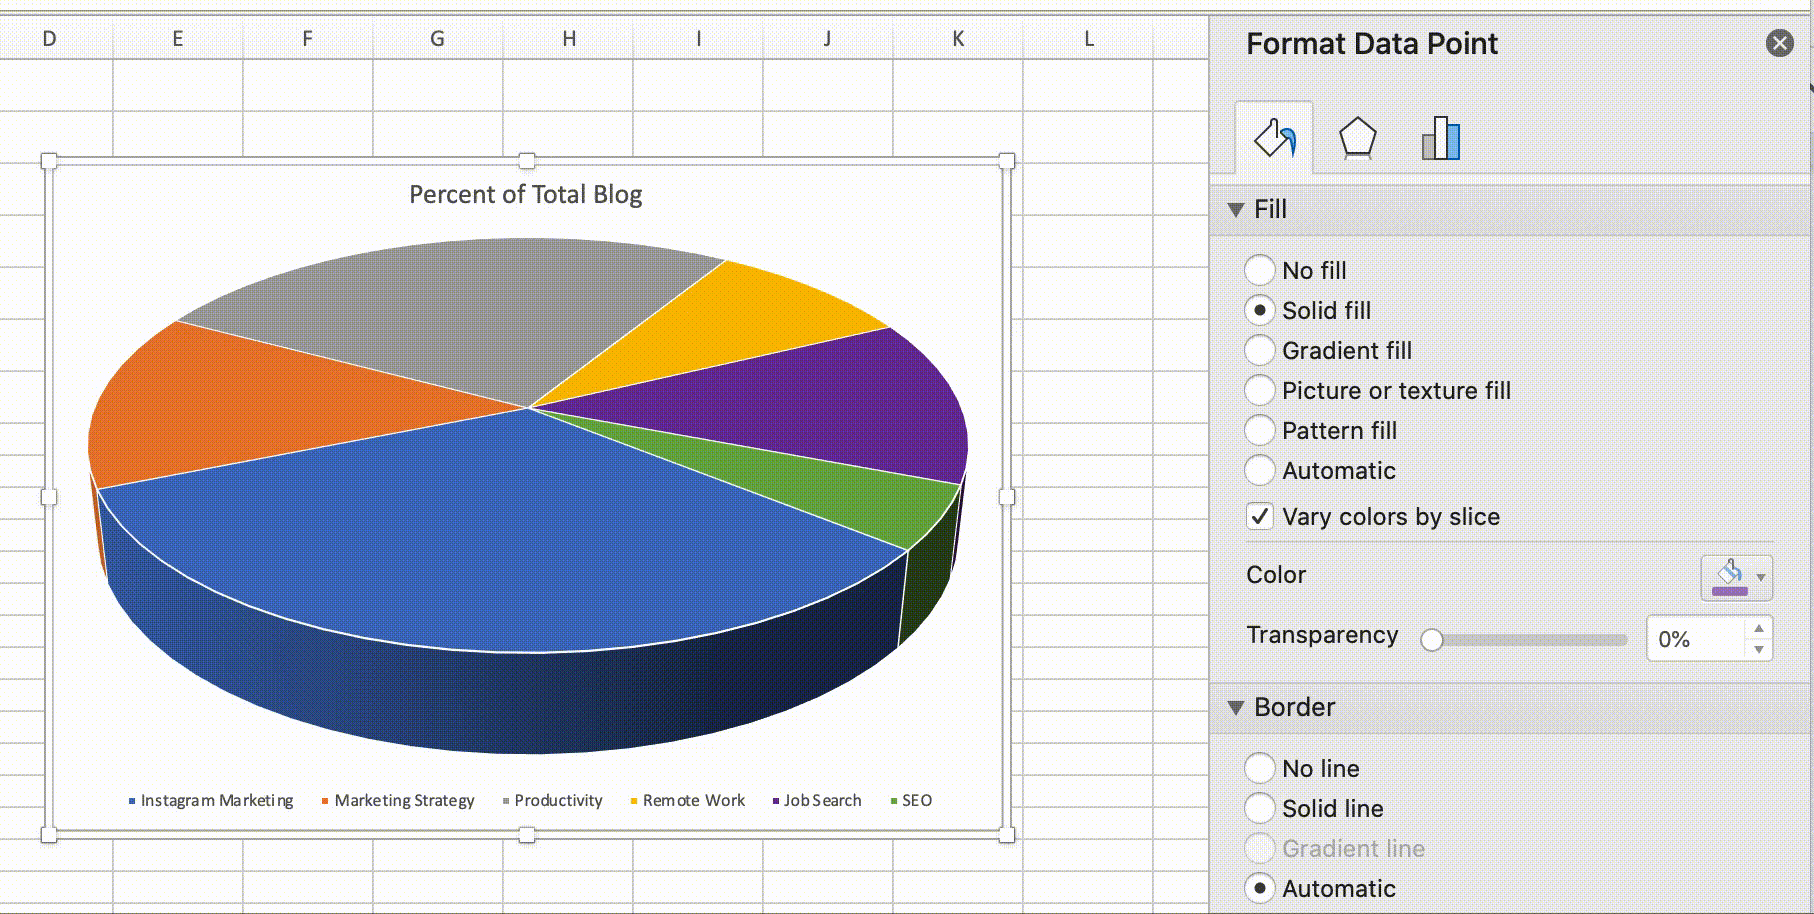 How to change the color of an individual pie chart section in excel.